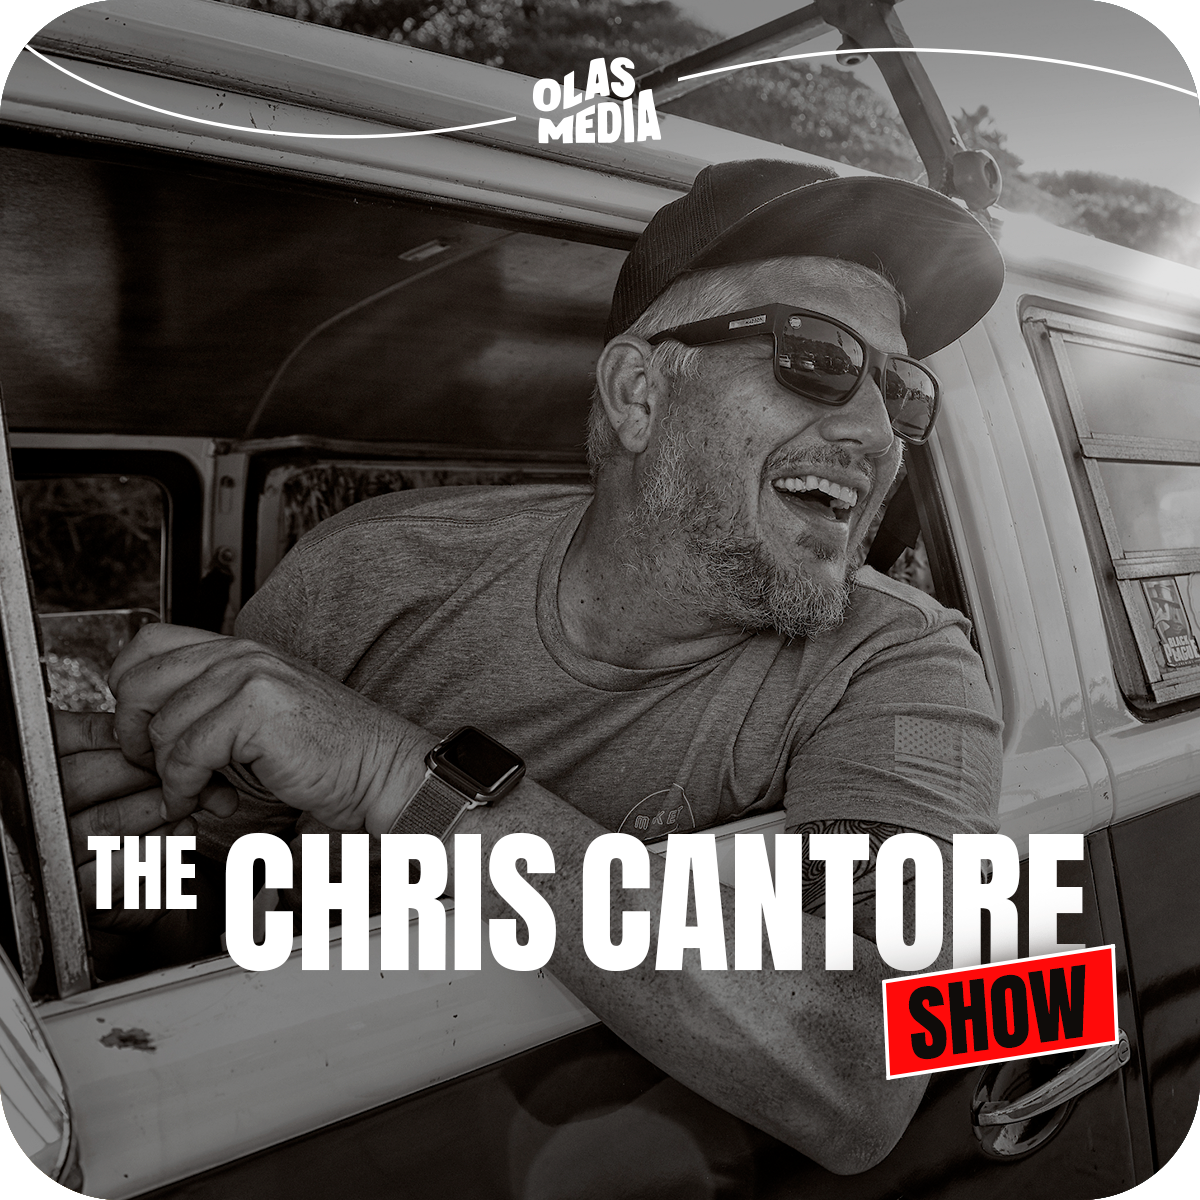 The Cantore Show